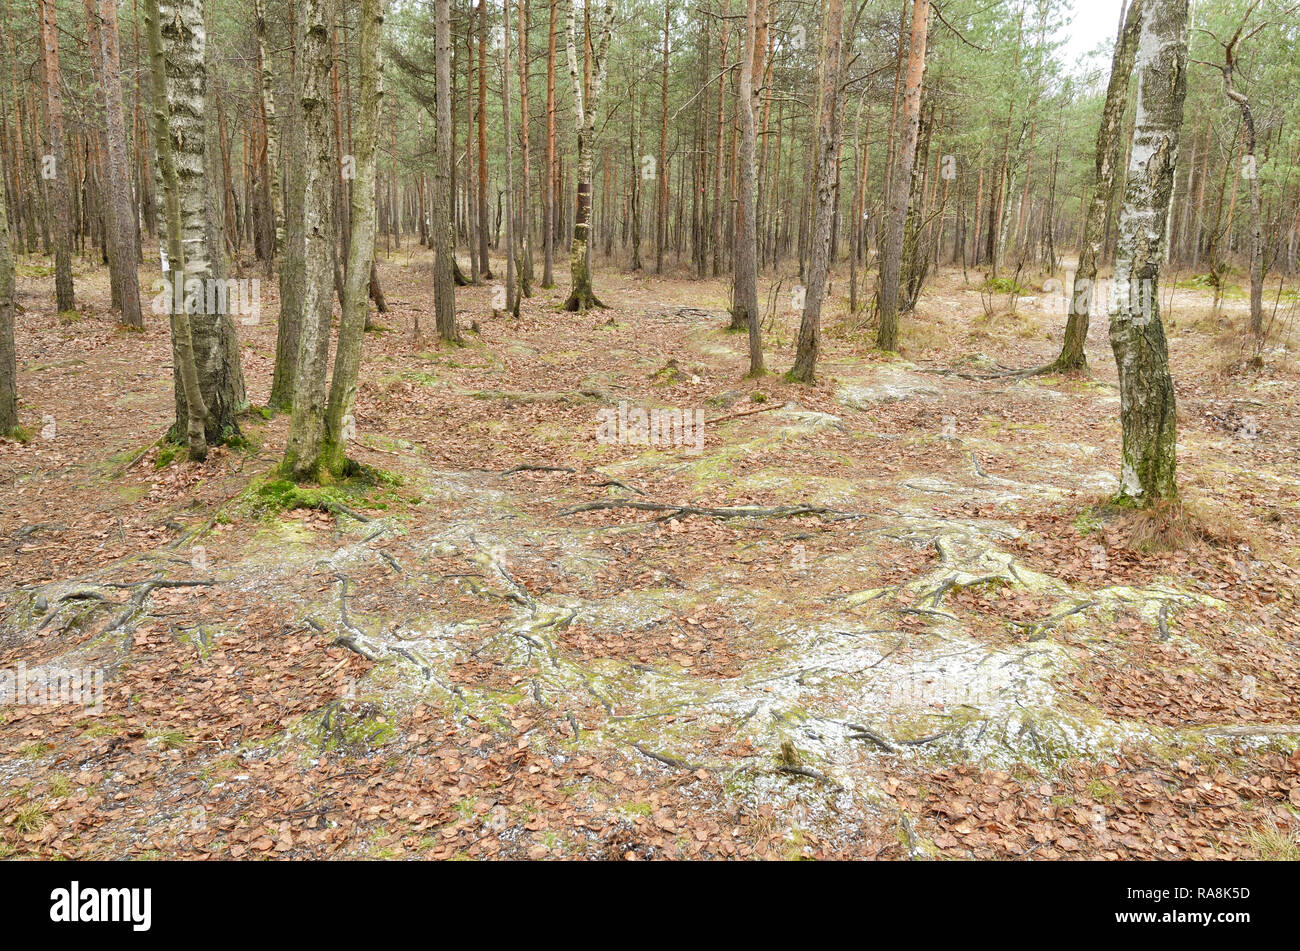 Wildlife in the forest.Around are rising pine and other trees. Stock Photo